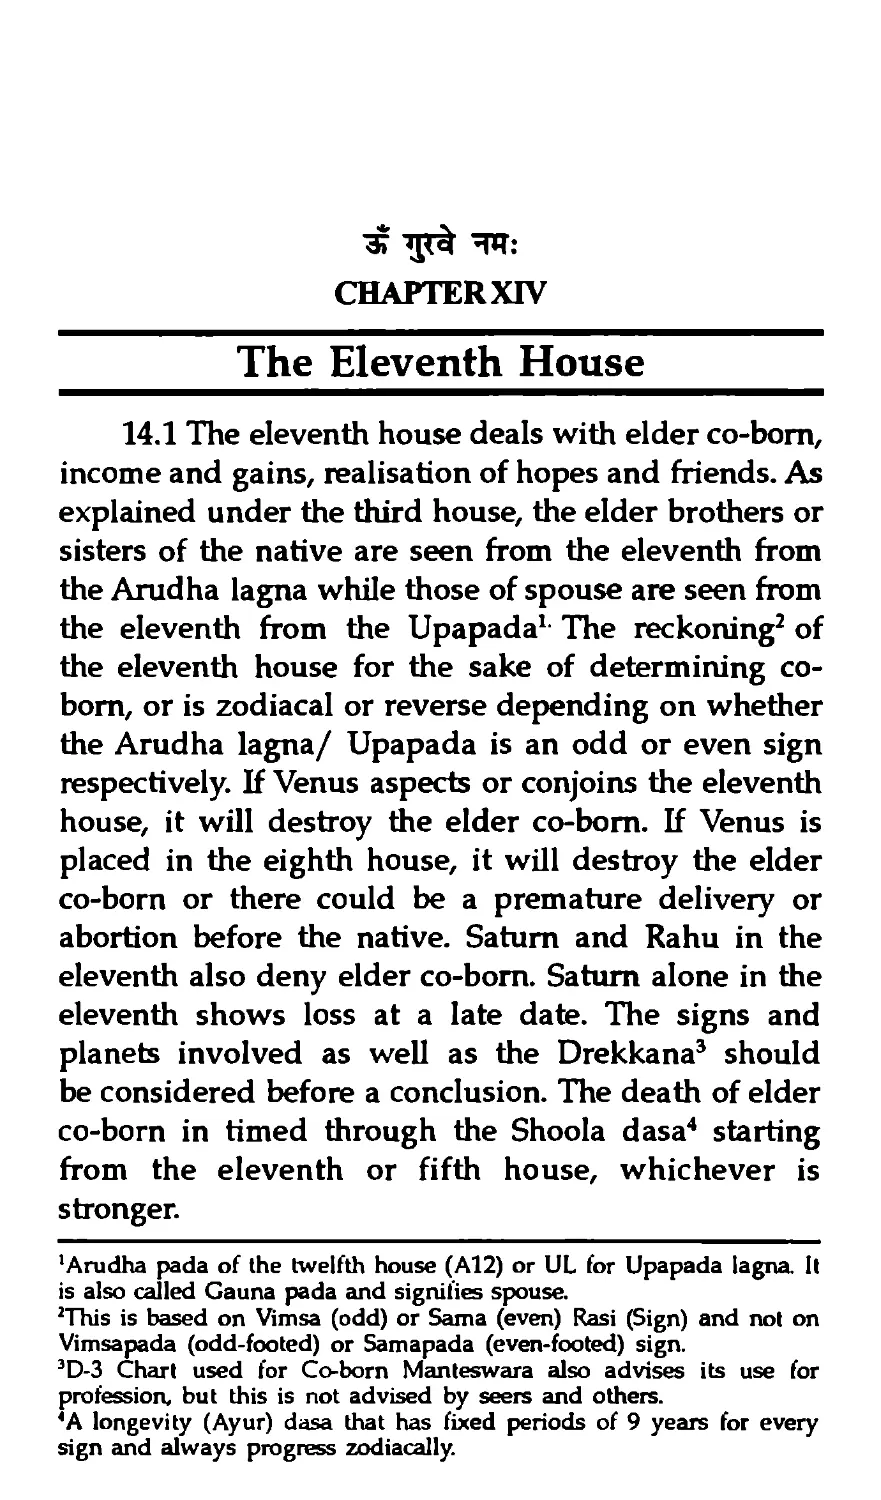 The Eleventh House